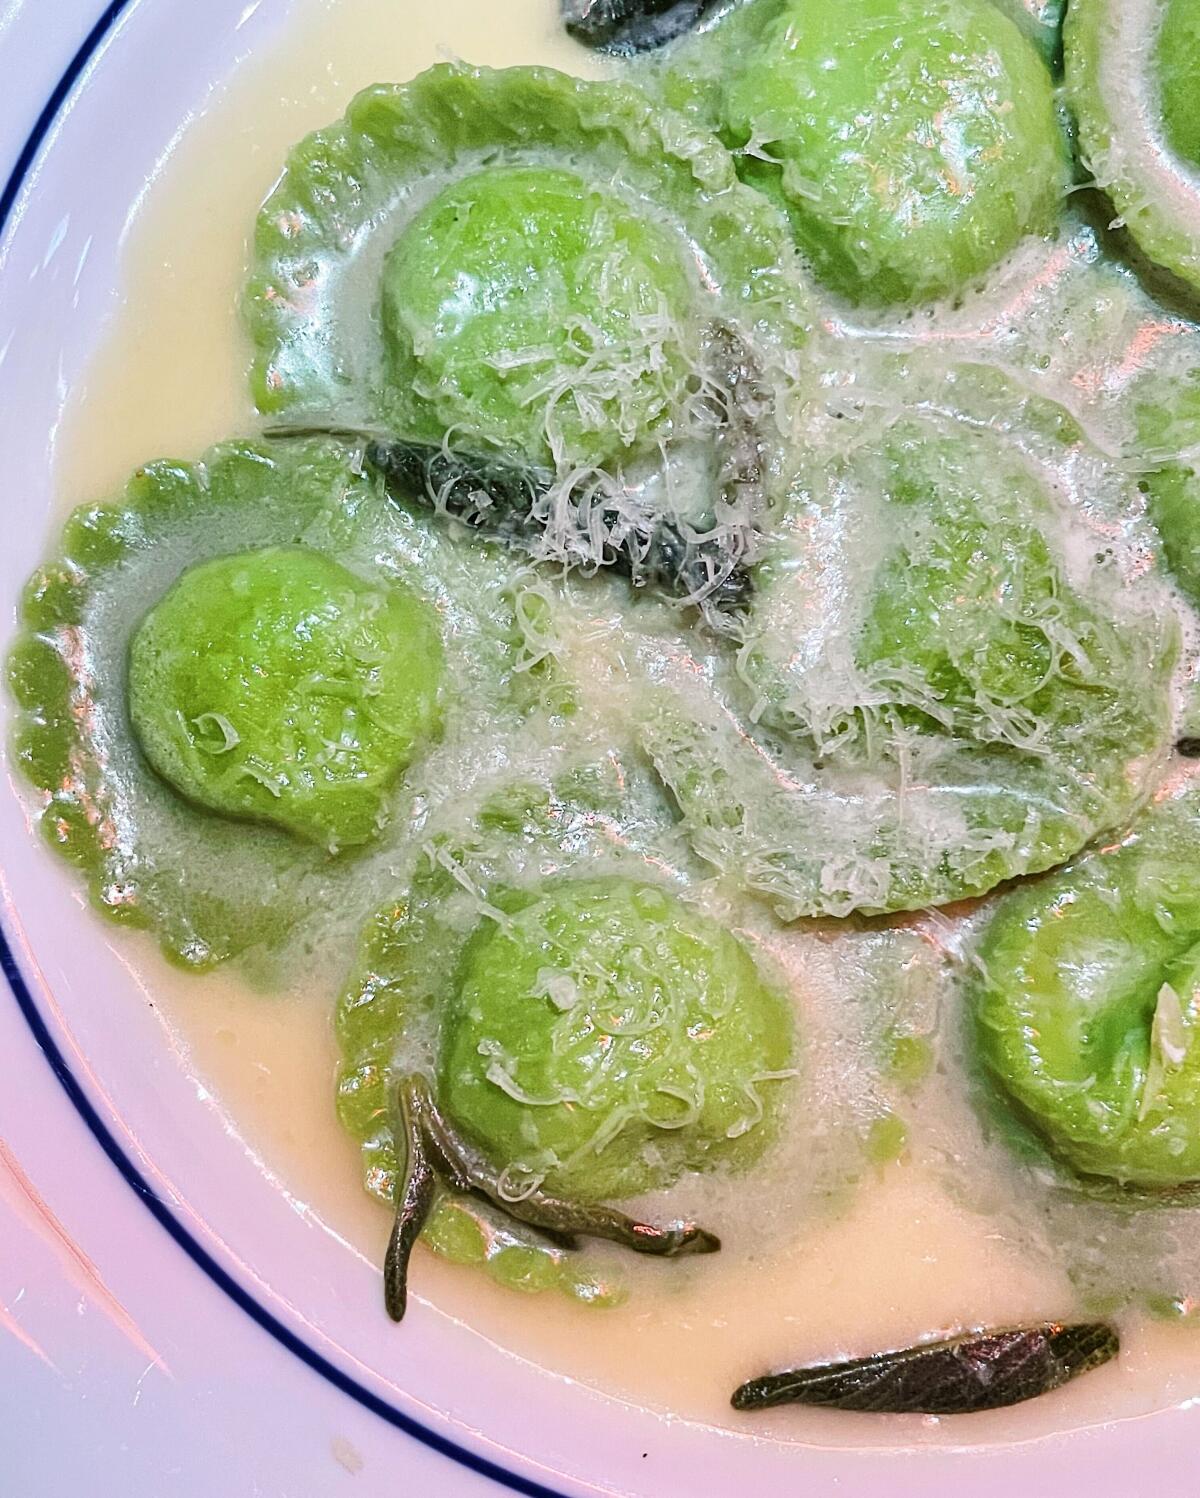 A plate of round green ravioli in butter sauce with shredded cheese